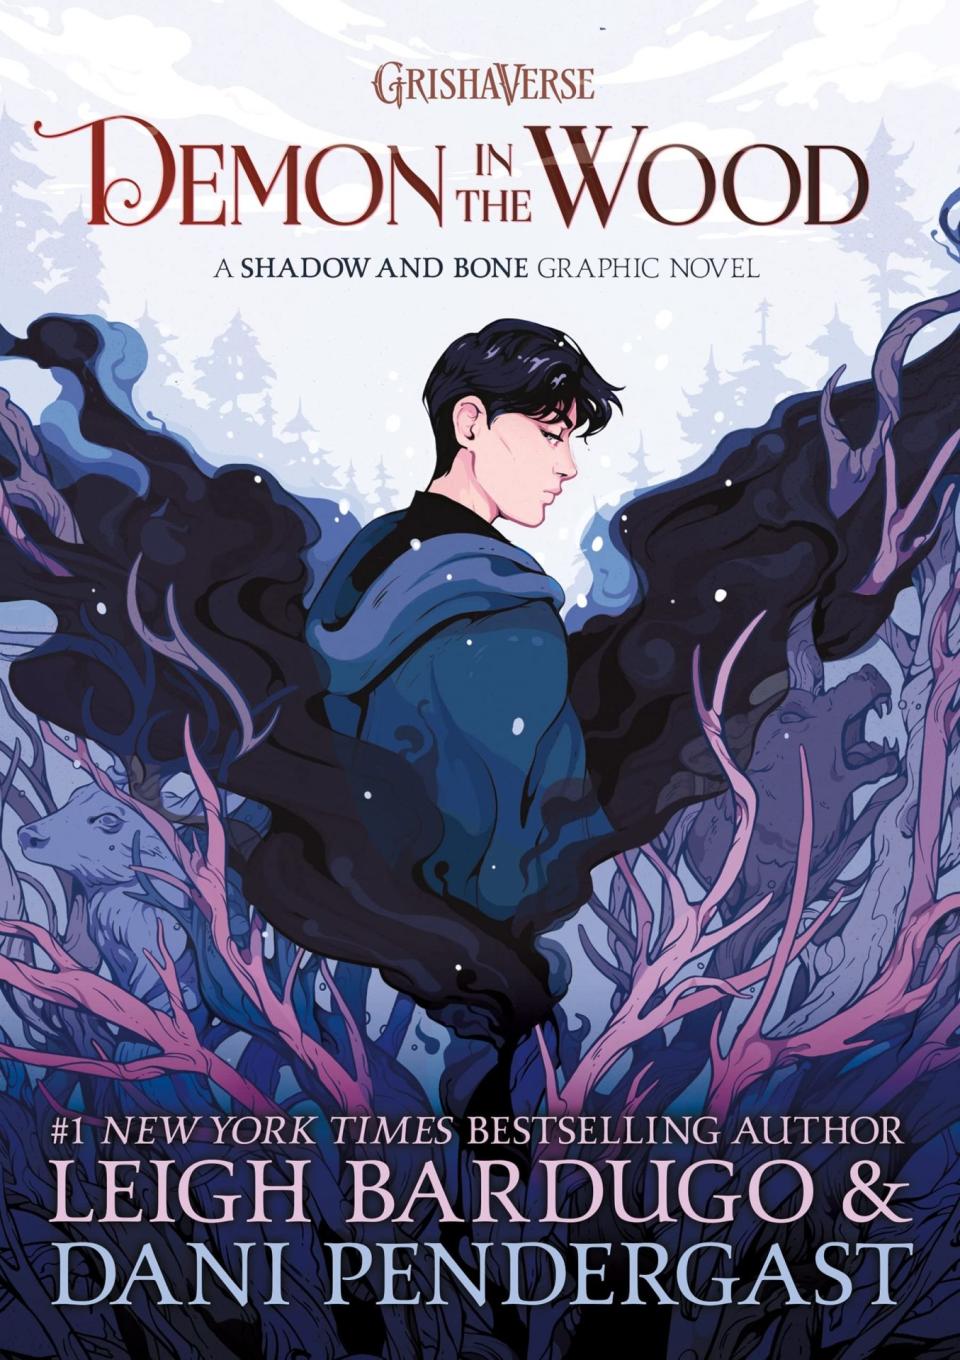 The cover for Demon in the Wood shows an illustration of the Darkling as a young man in a strange forest